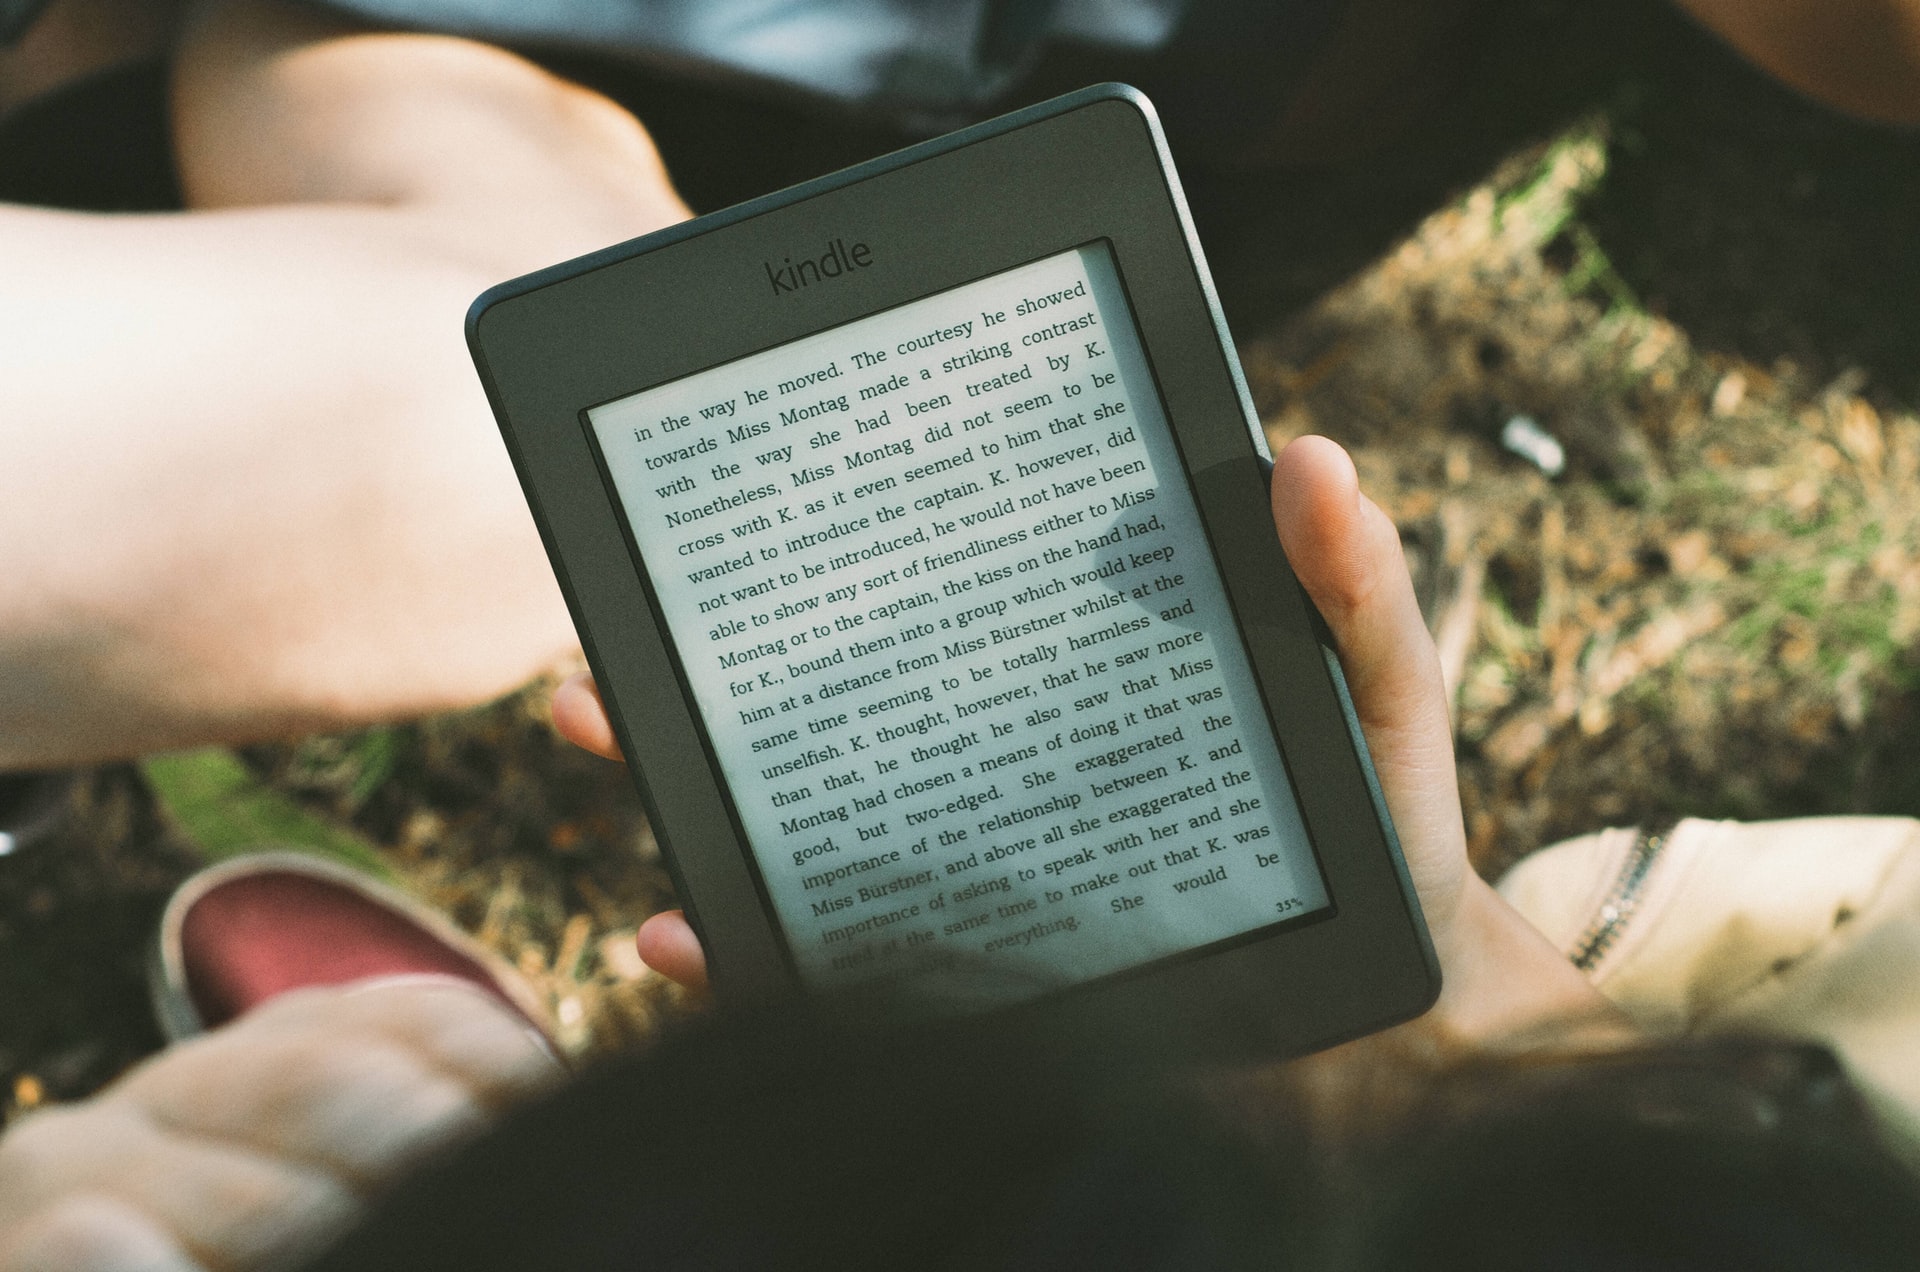 Free Kindle Books - How to Download